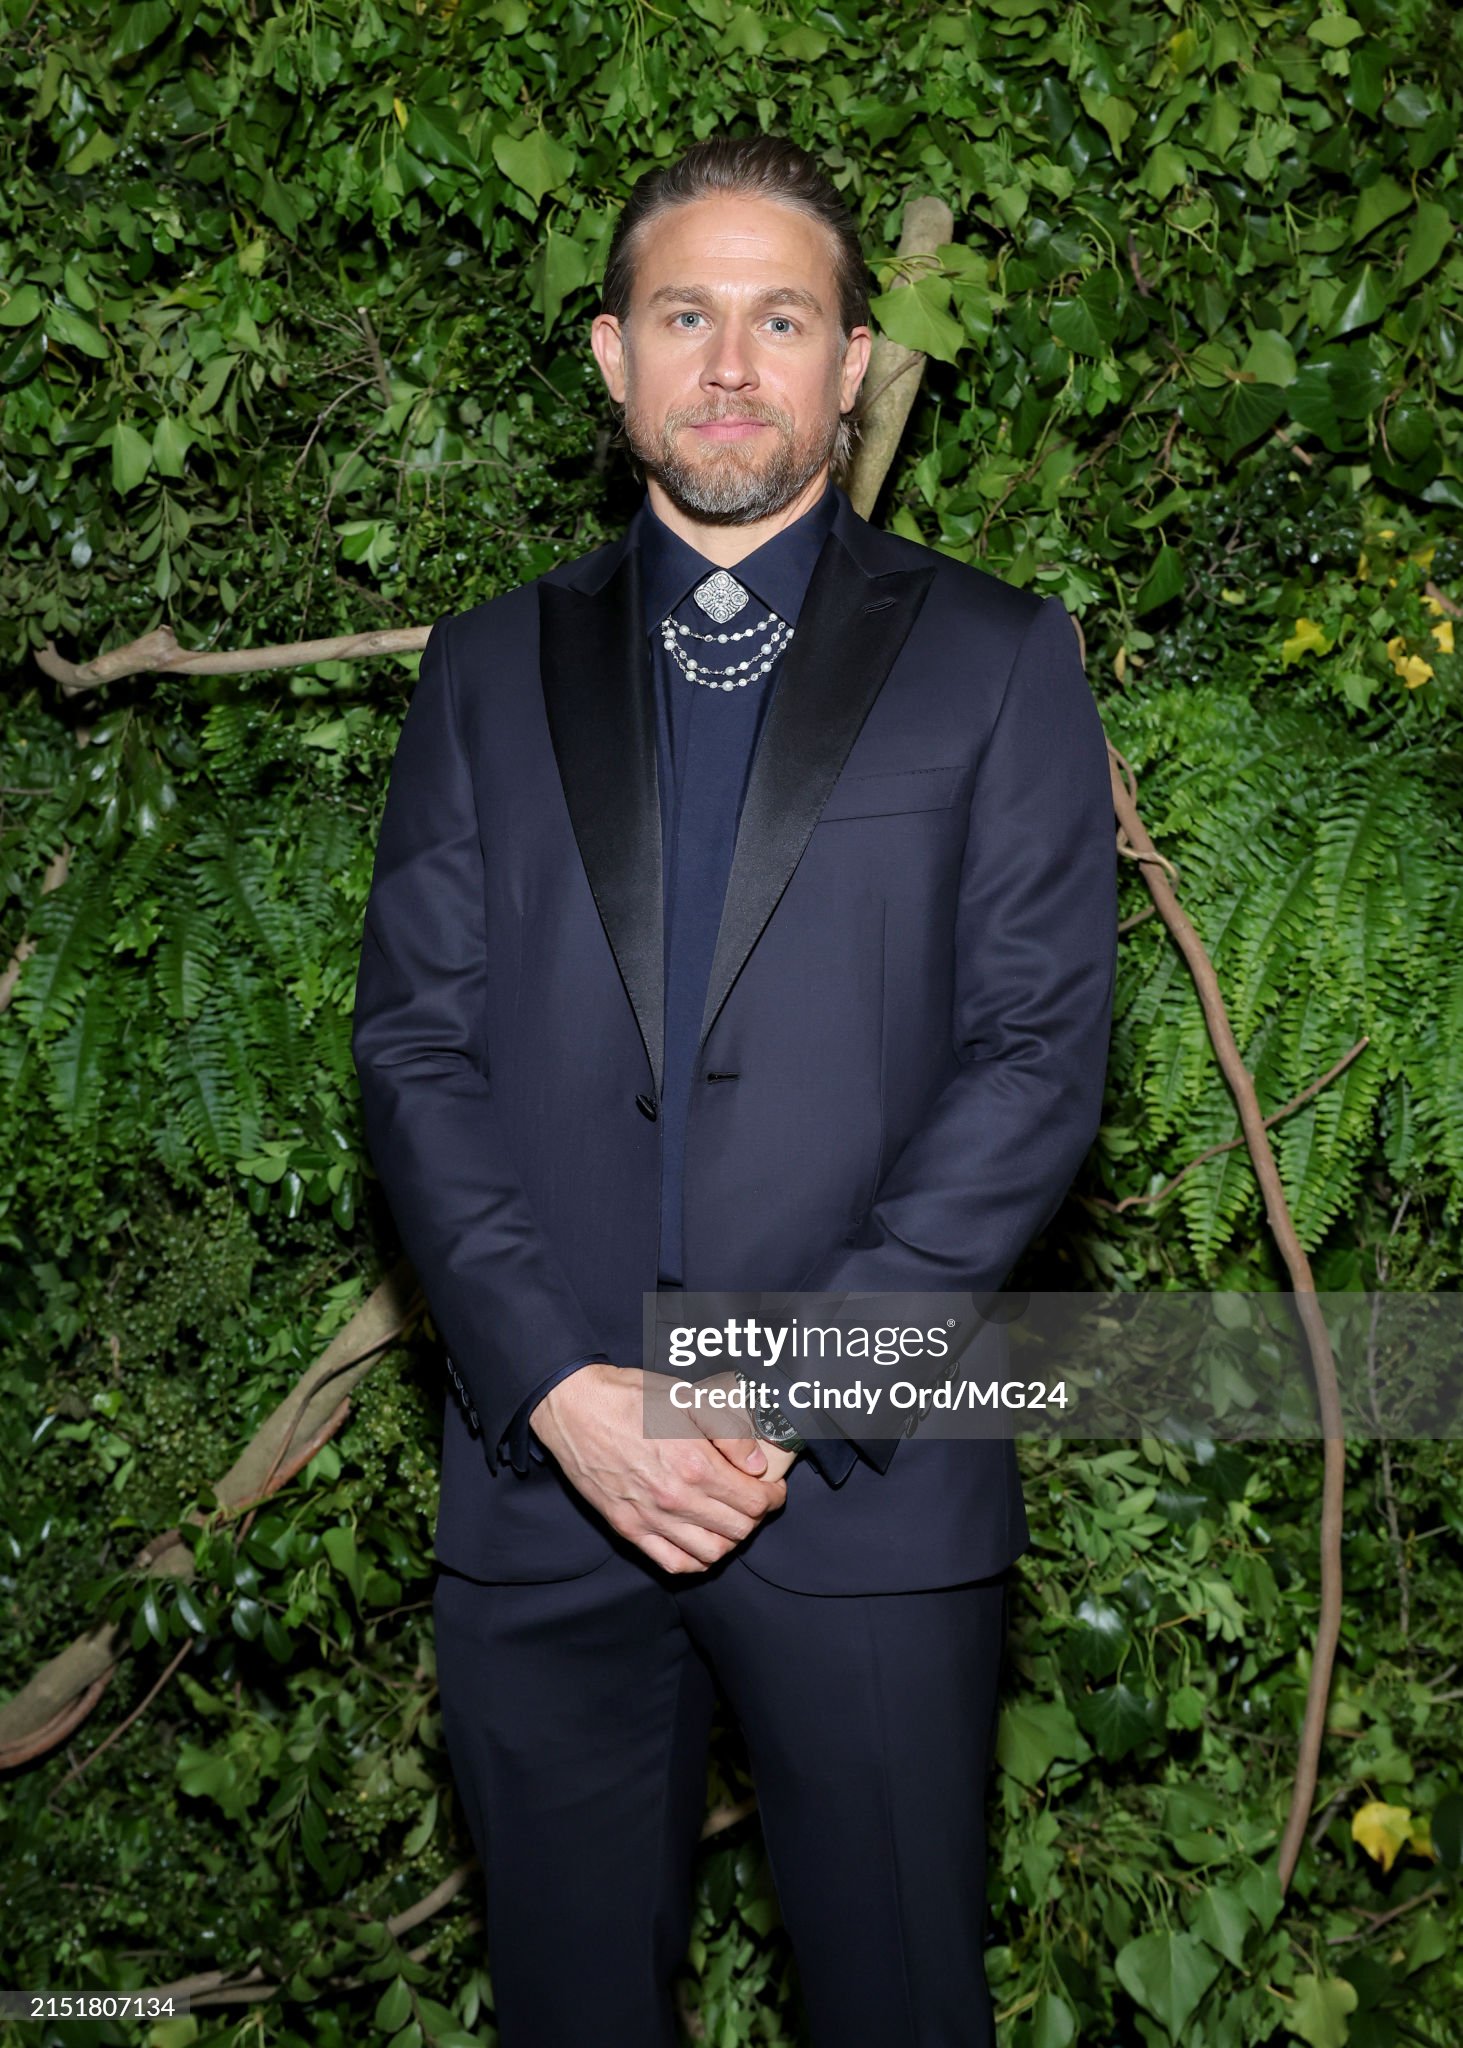 gettyimages-2151807134-2048x2048.jpg